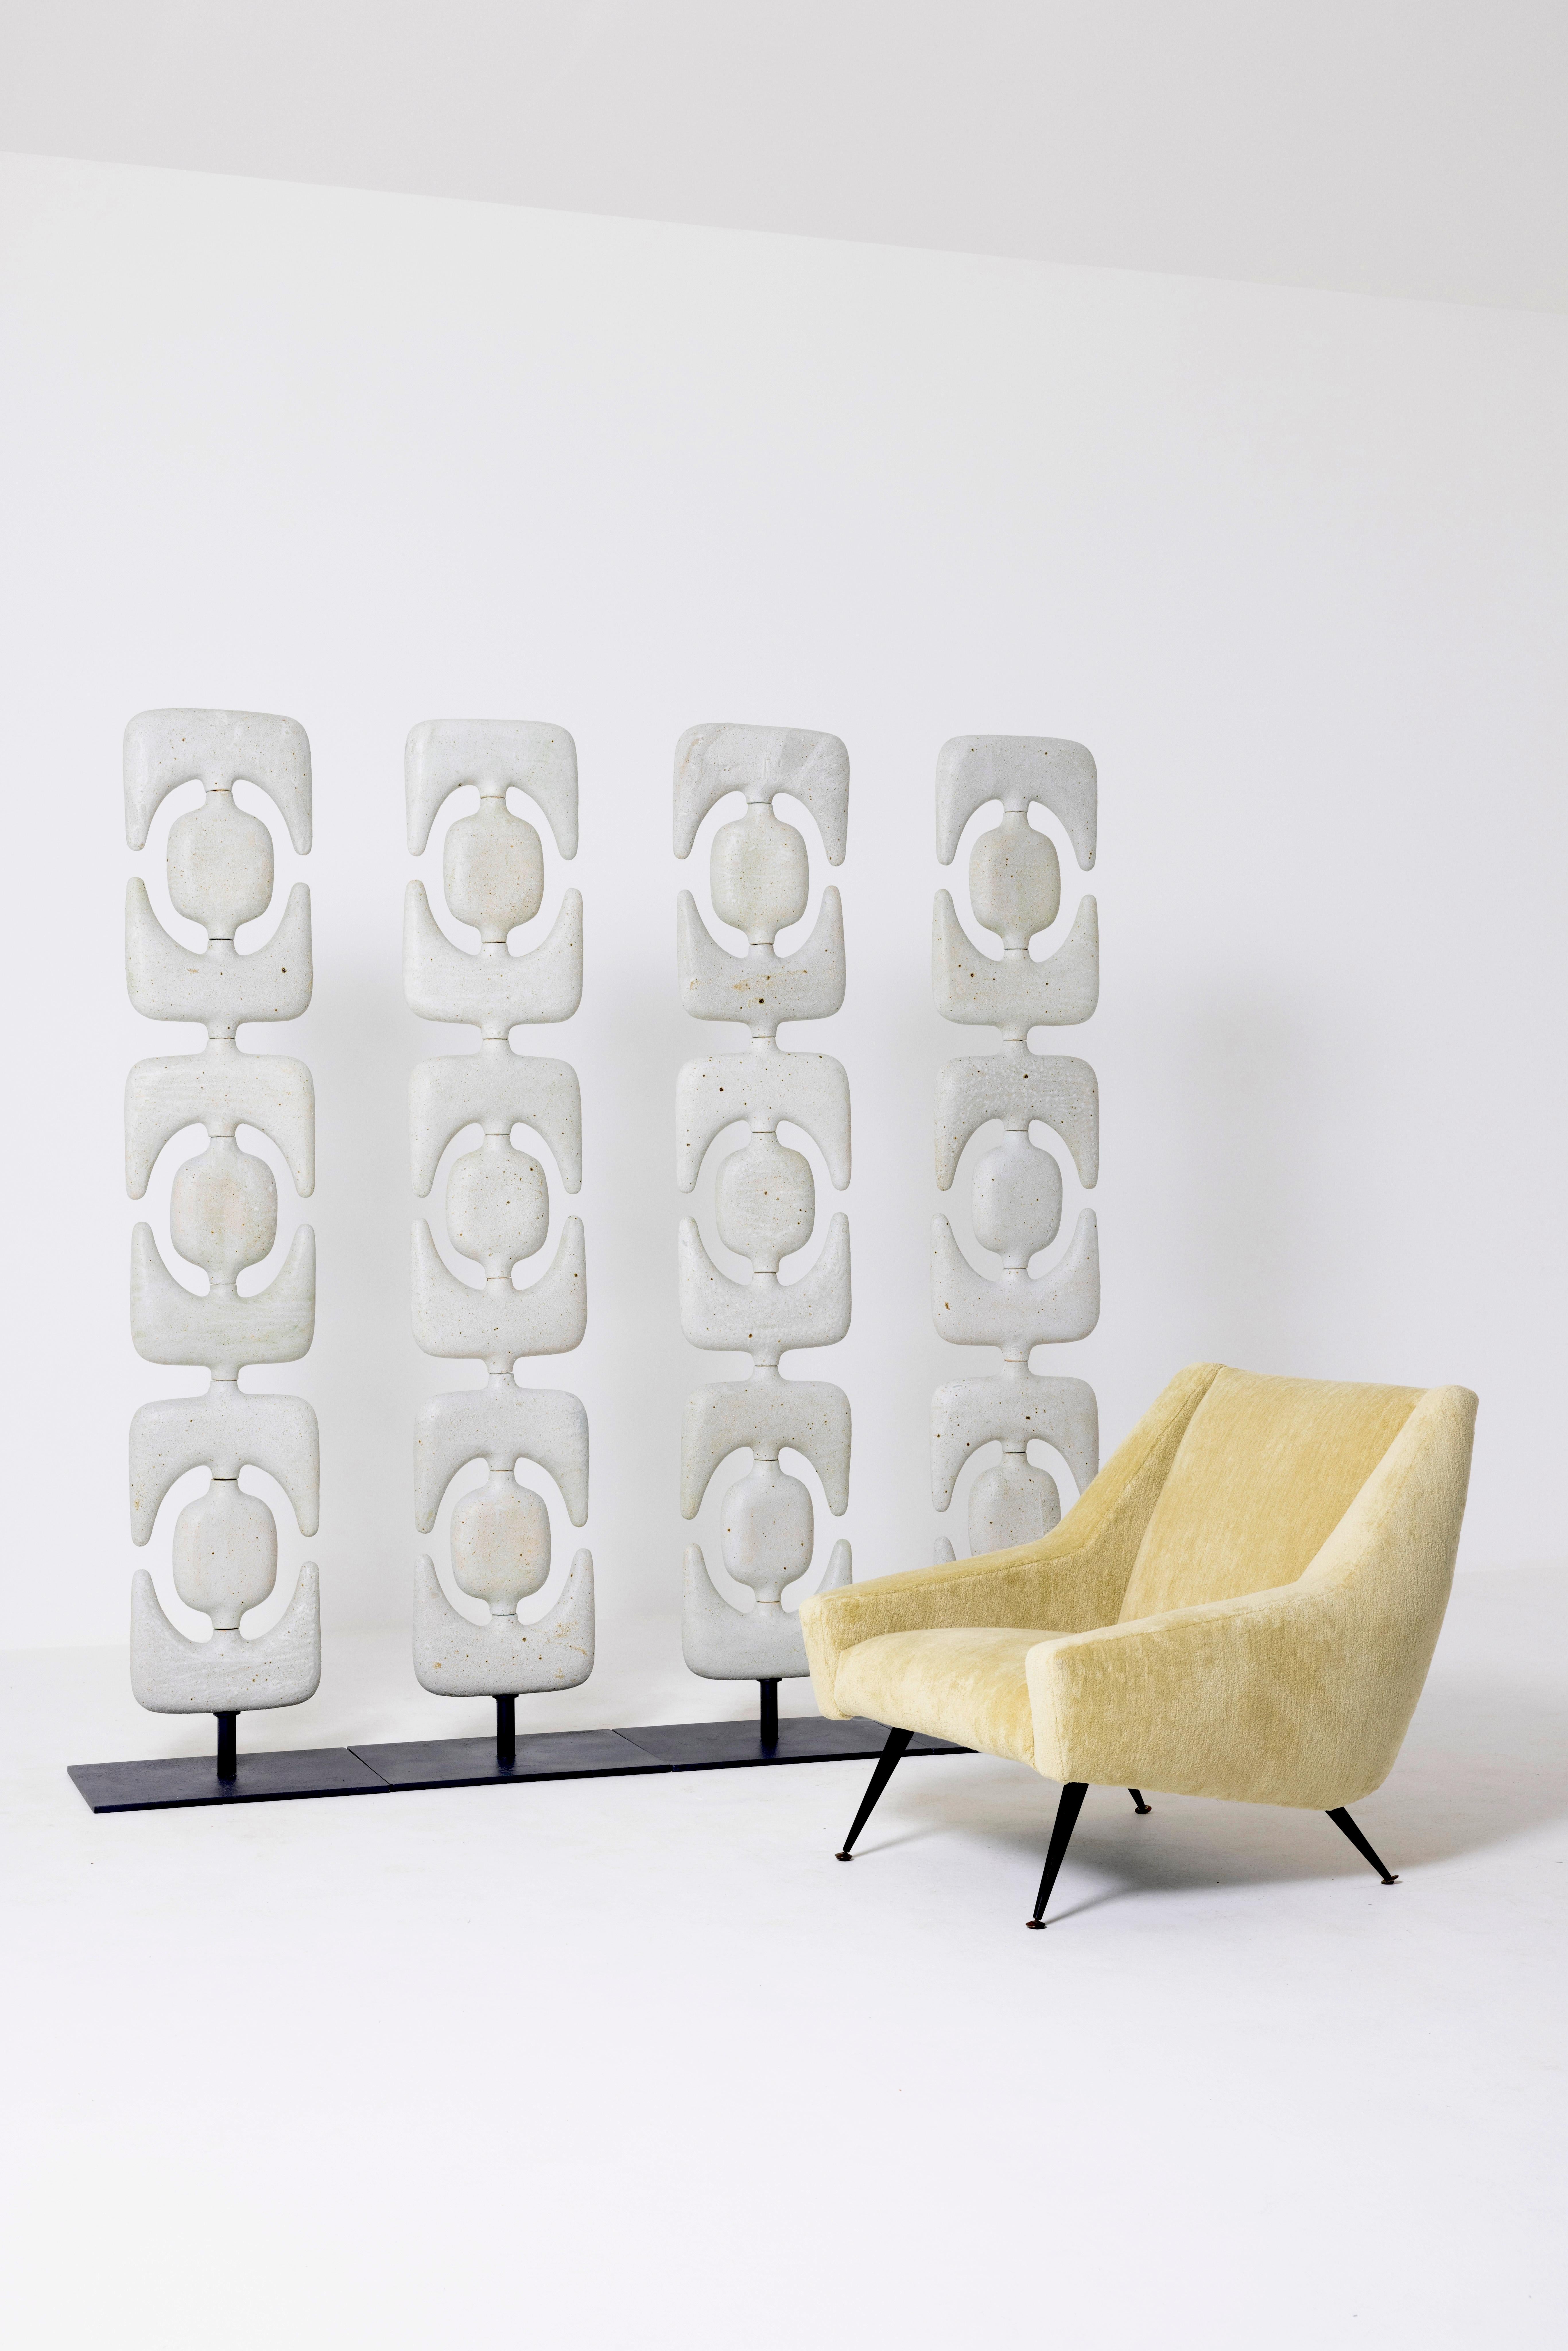 Natasha Dakhli
Totems/Room Divider, 2021
Material: Stoneware, white enamel
Dimension; H 185 x 163 x 52 cm

Modular totems sculptures made of white enamelled stoneware featuring abstract shapes that feel talismanic and mysterious in their